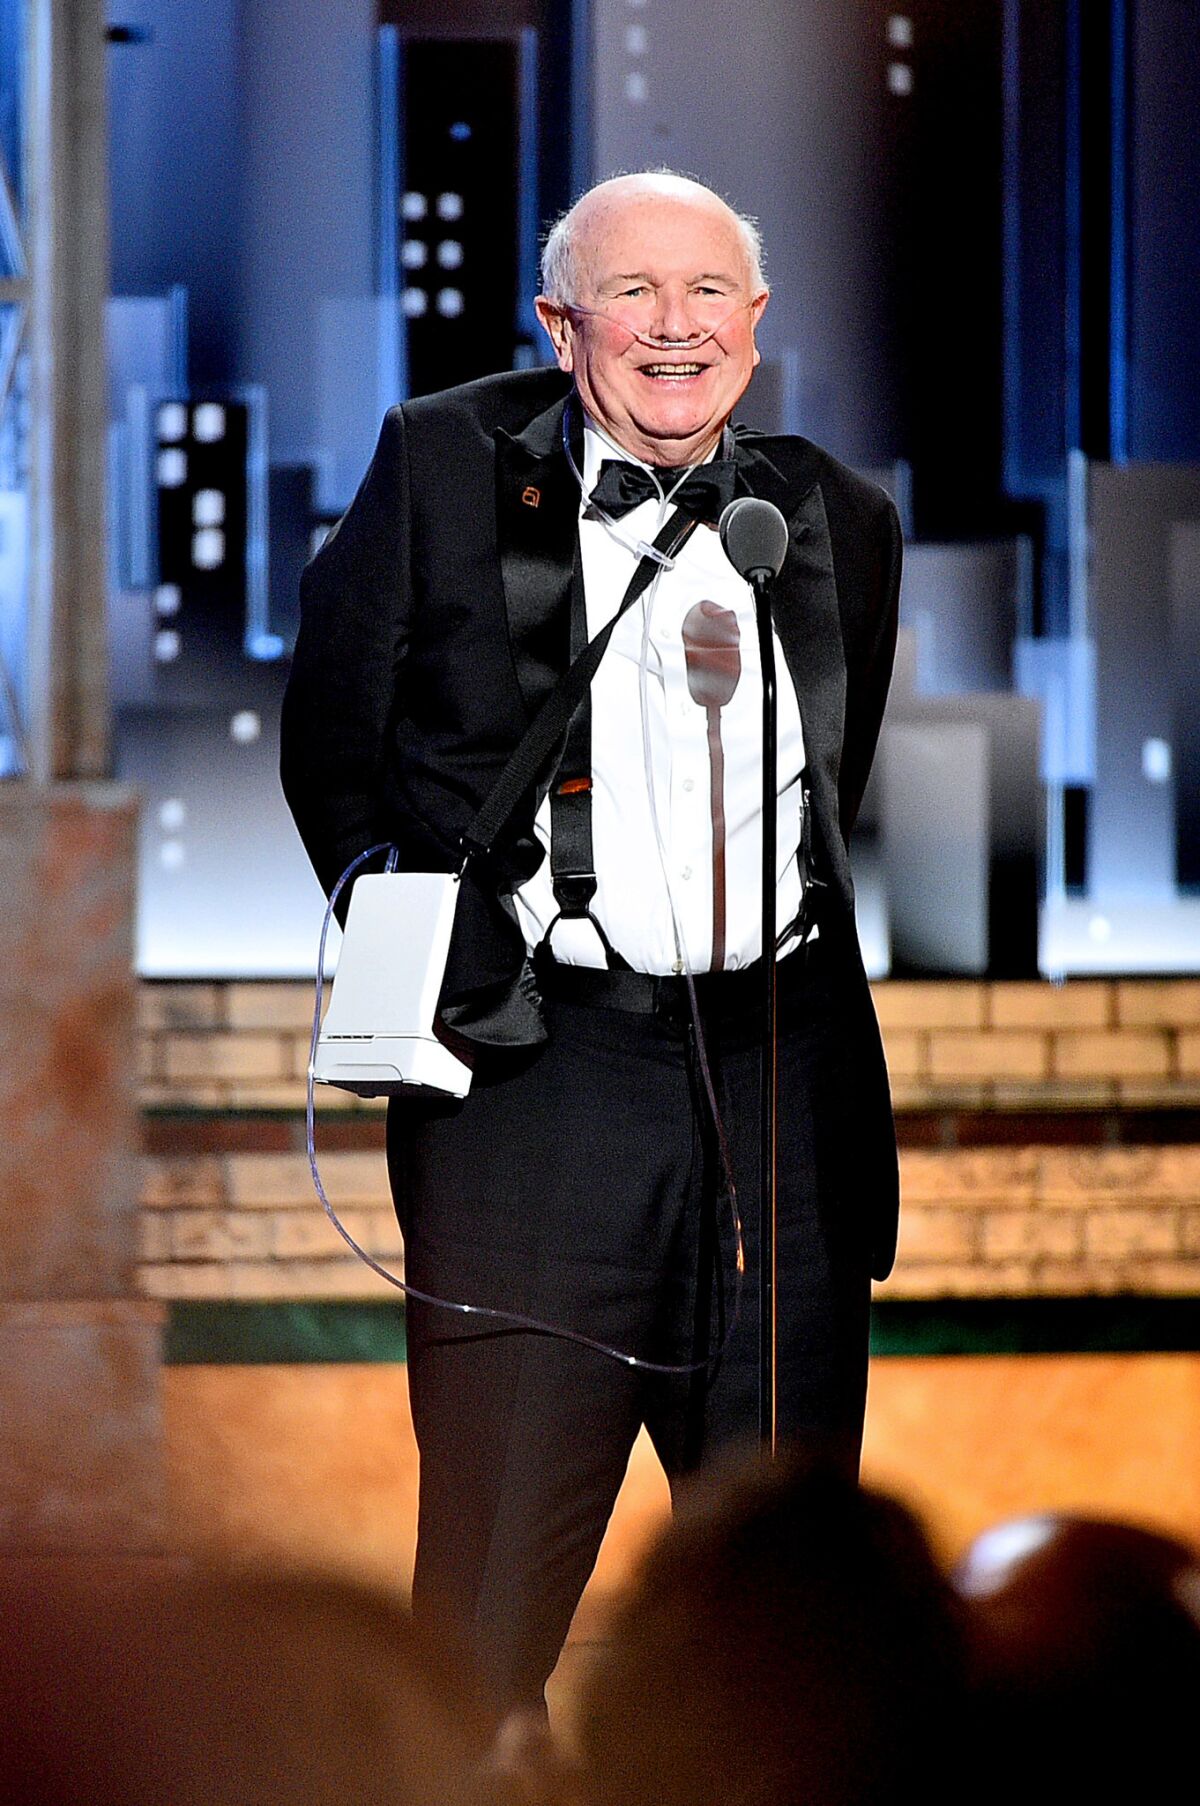 Terrence McNally accepts his lifetime achievement award at the Tony Awards on Sunday in New York City.